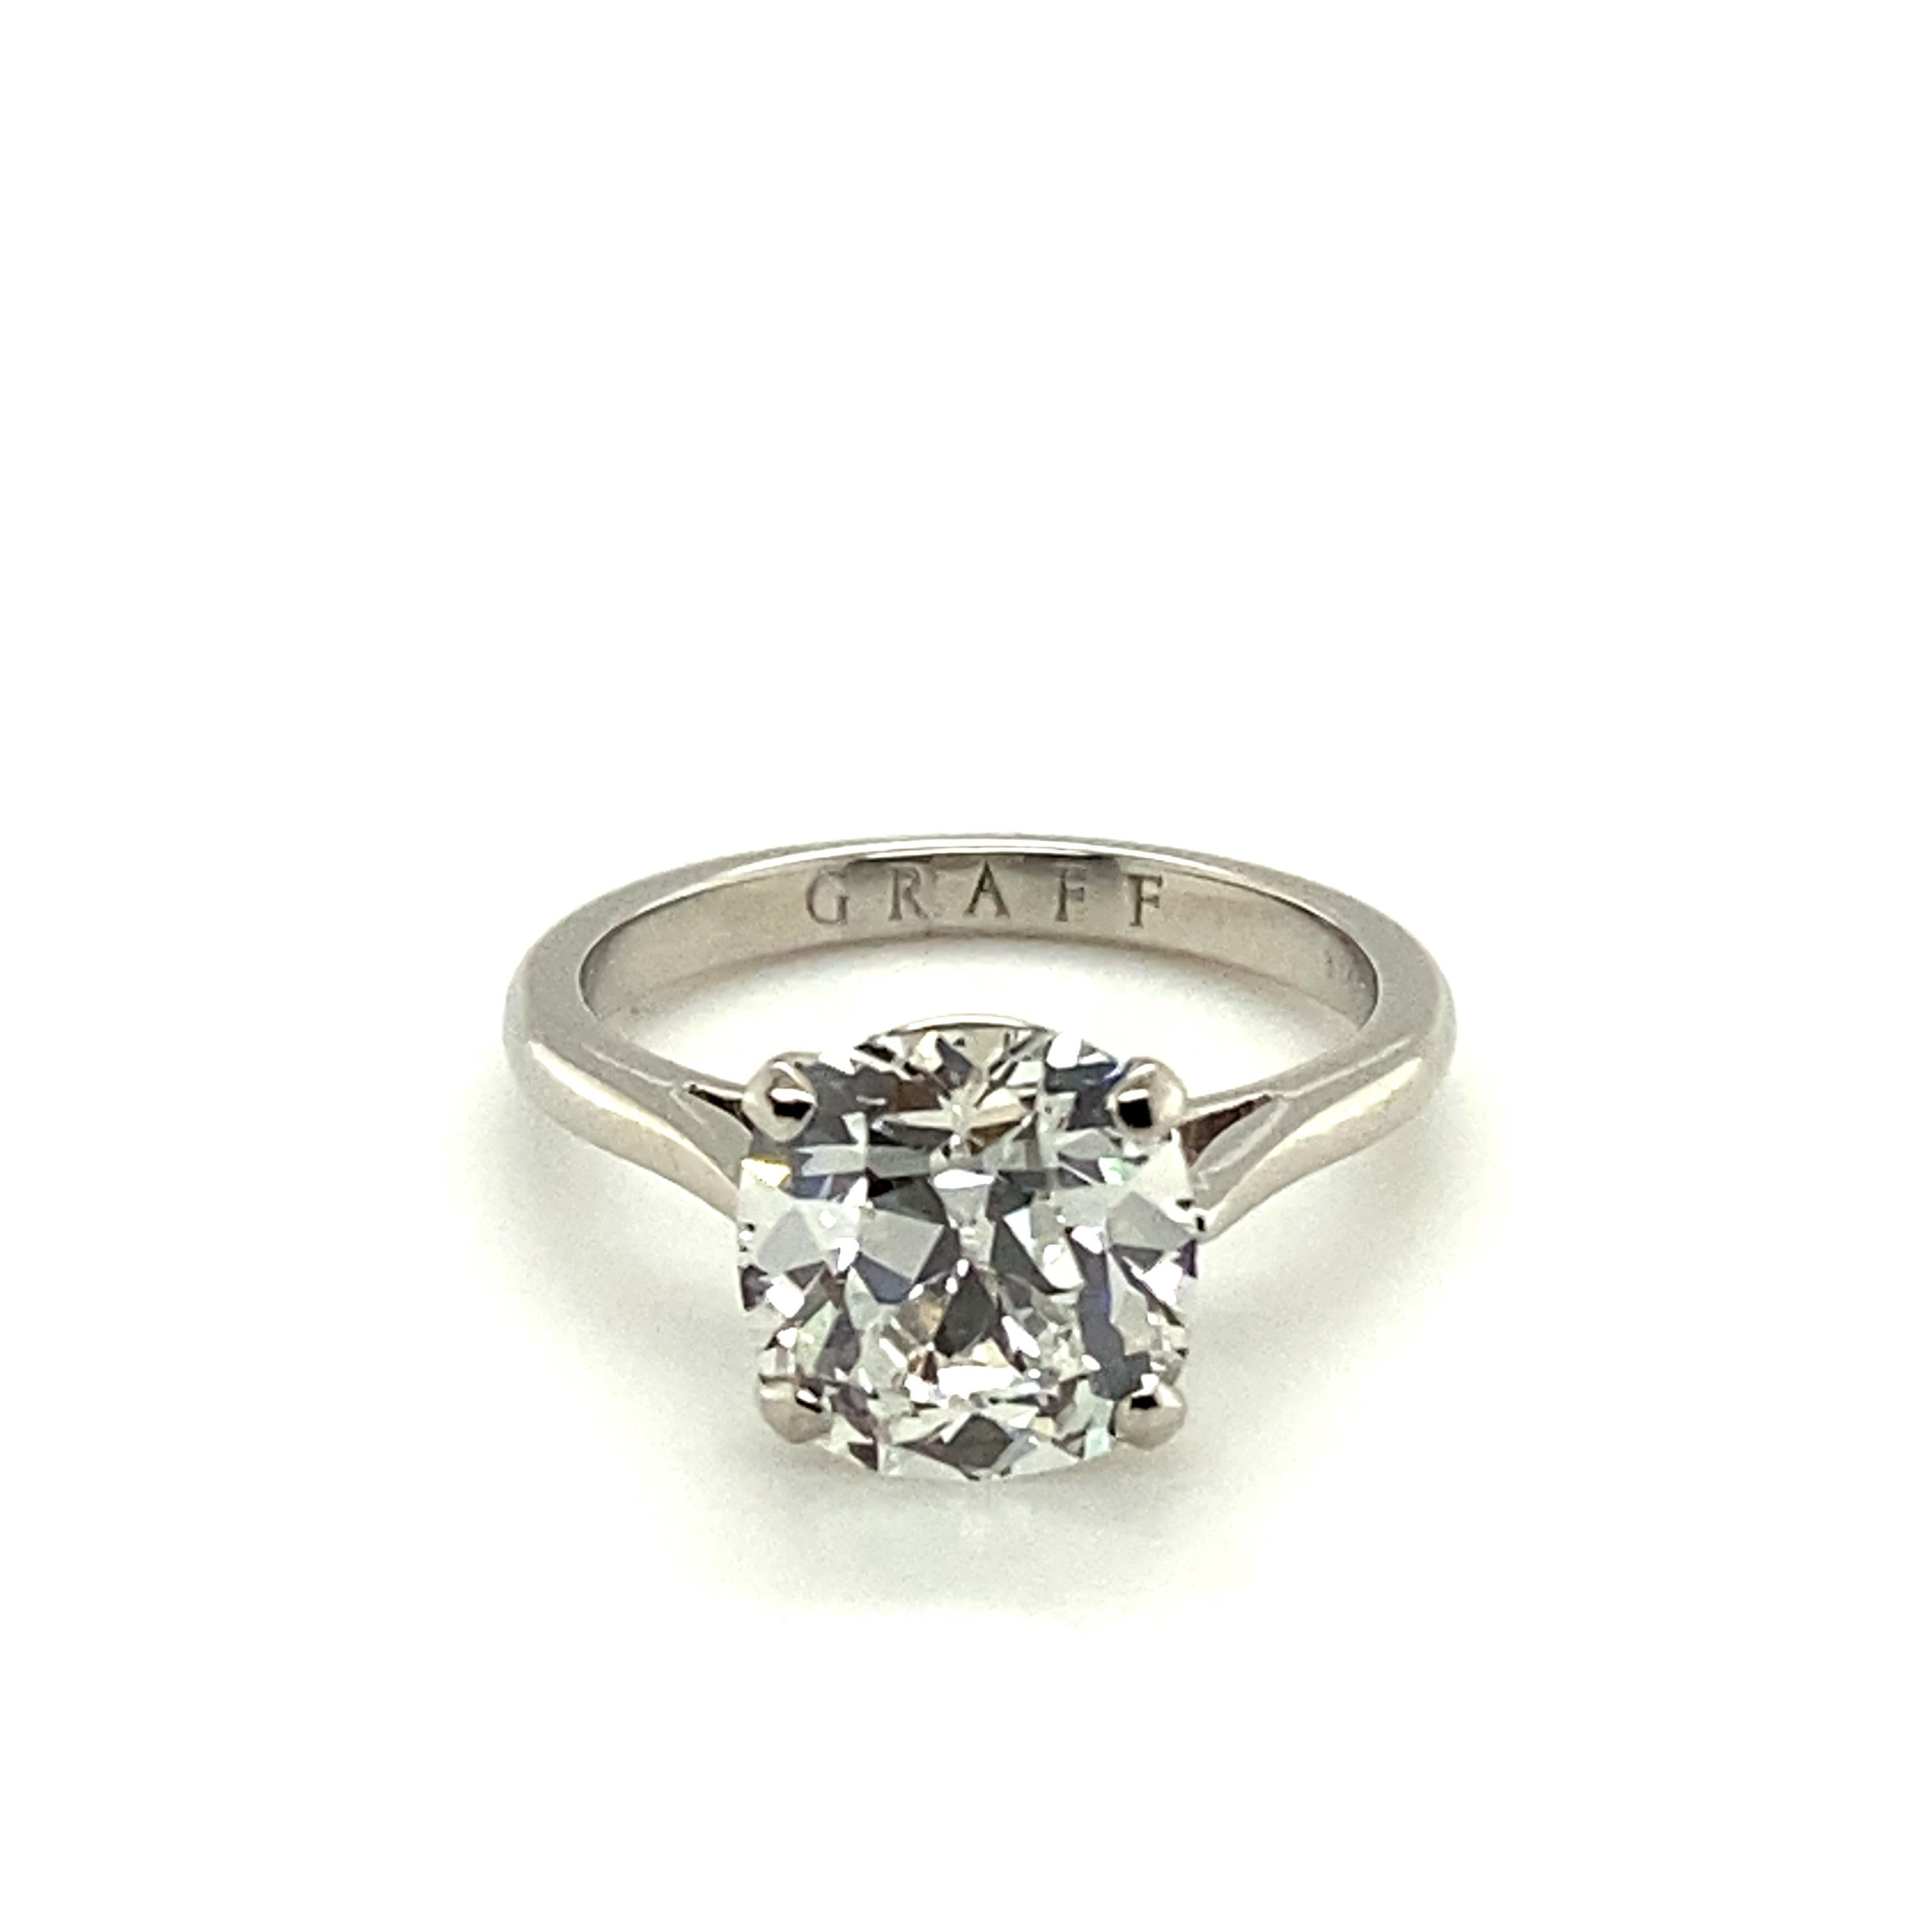 This timeless and stunning solitaire diamond ring by well-known diamantaire GRAFF is set with a beautiful old mine/cushion-cut diamond of 3.14 carats with G colour and vs1 clarity.
Set in a classic four-prong setting in 18 karat white gold, this